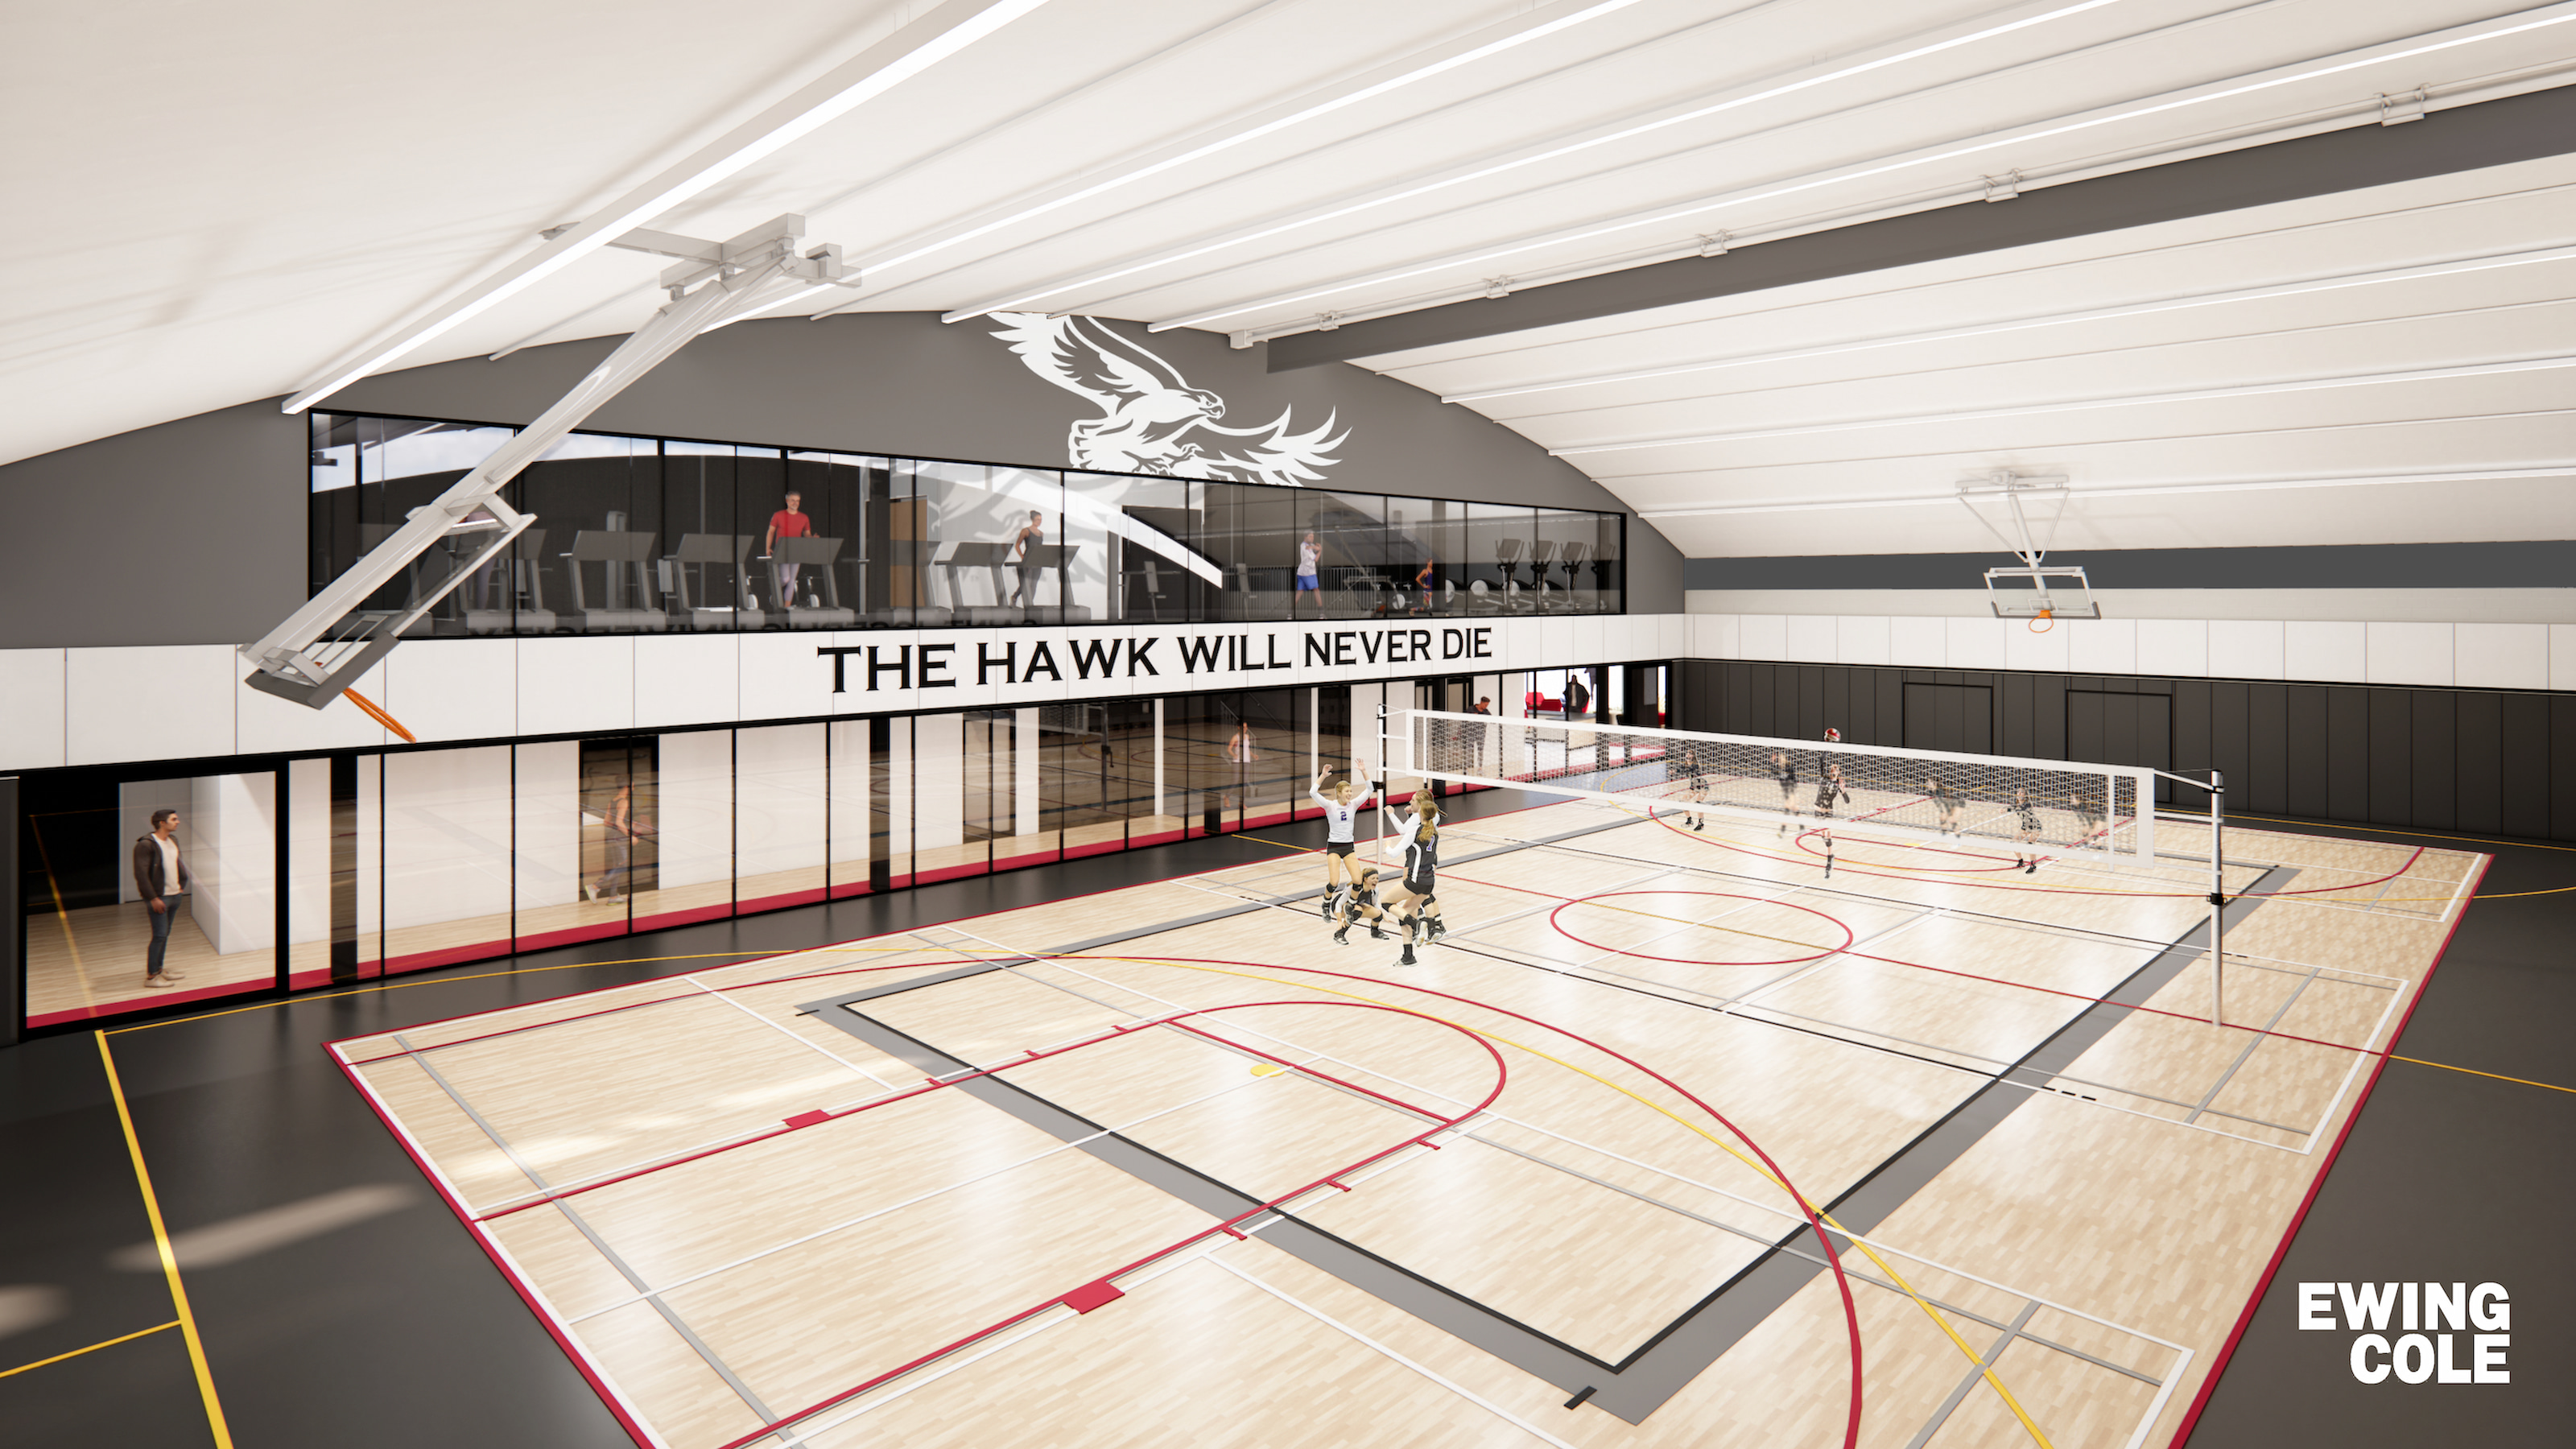 The addition of a multipurpose court allows for more flexible space to accommodate the evolving needs of today’s students and is designed to support any number of wellness programs and can still be used for traditional sports including club sports, intramurals, large group fitness classes and net nights. 